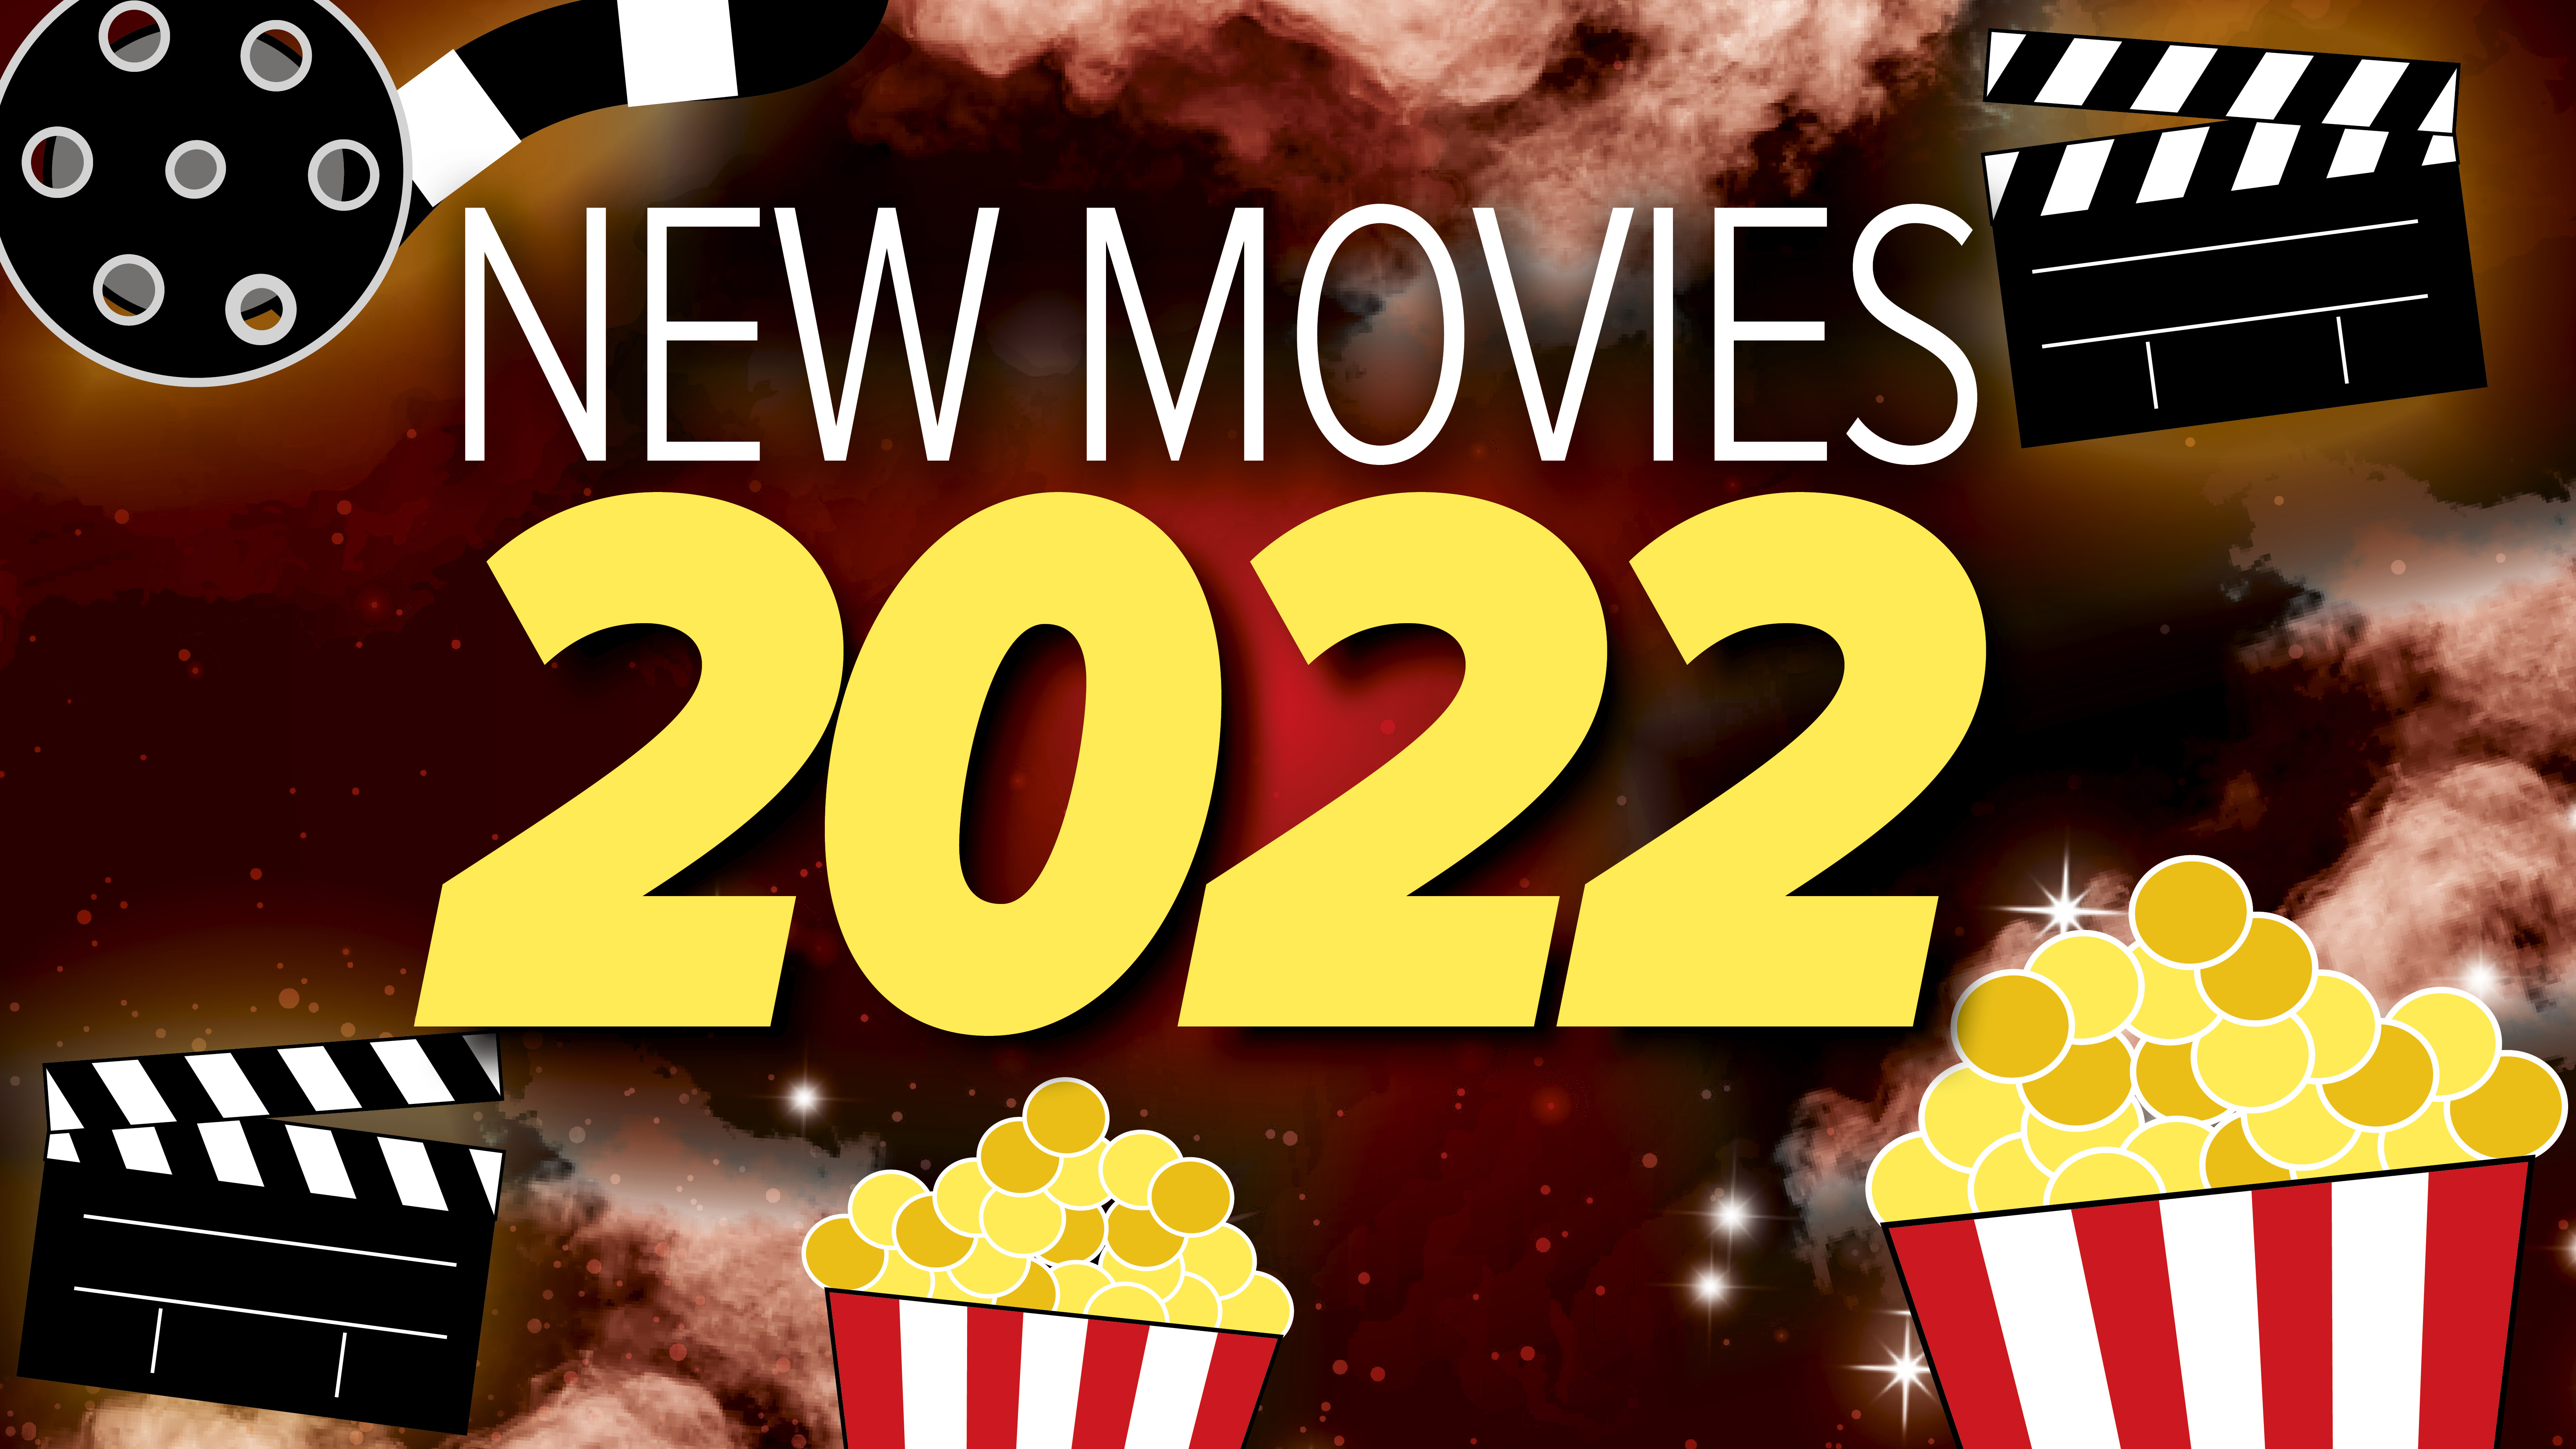 Pitt Calendar 2022 23 New Movies 2022: Release Dates, Trailers, Casts, Plots | What To Watch